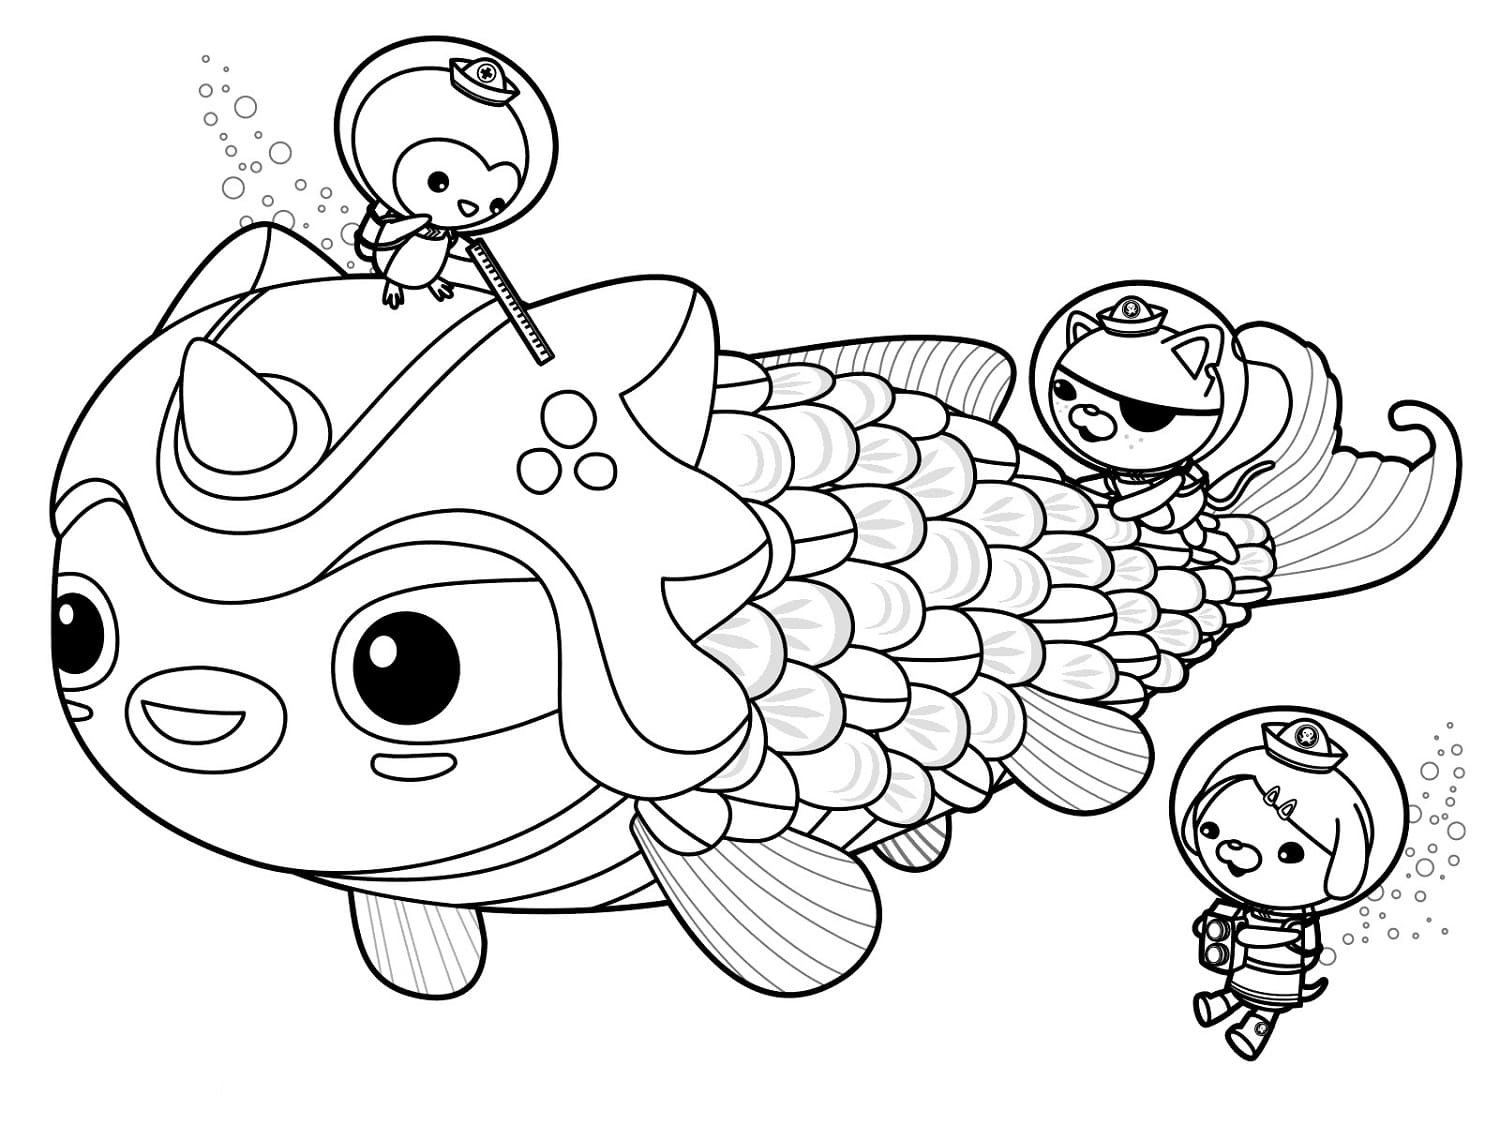 Printable Octonauts Coloring Pages Pdf - Coloring Pages Octonauts